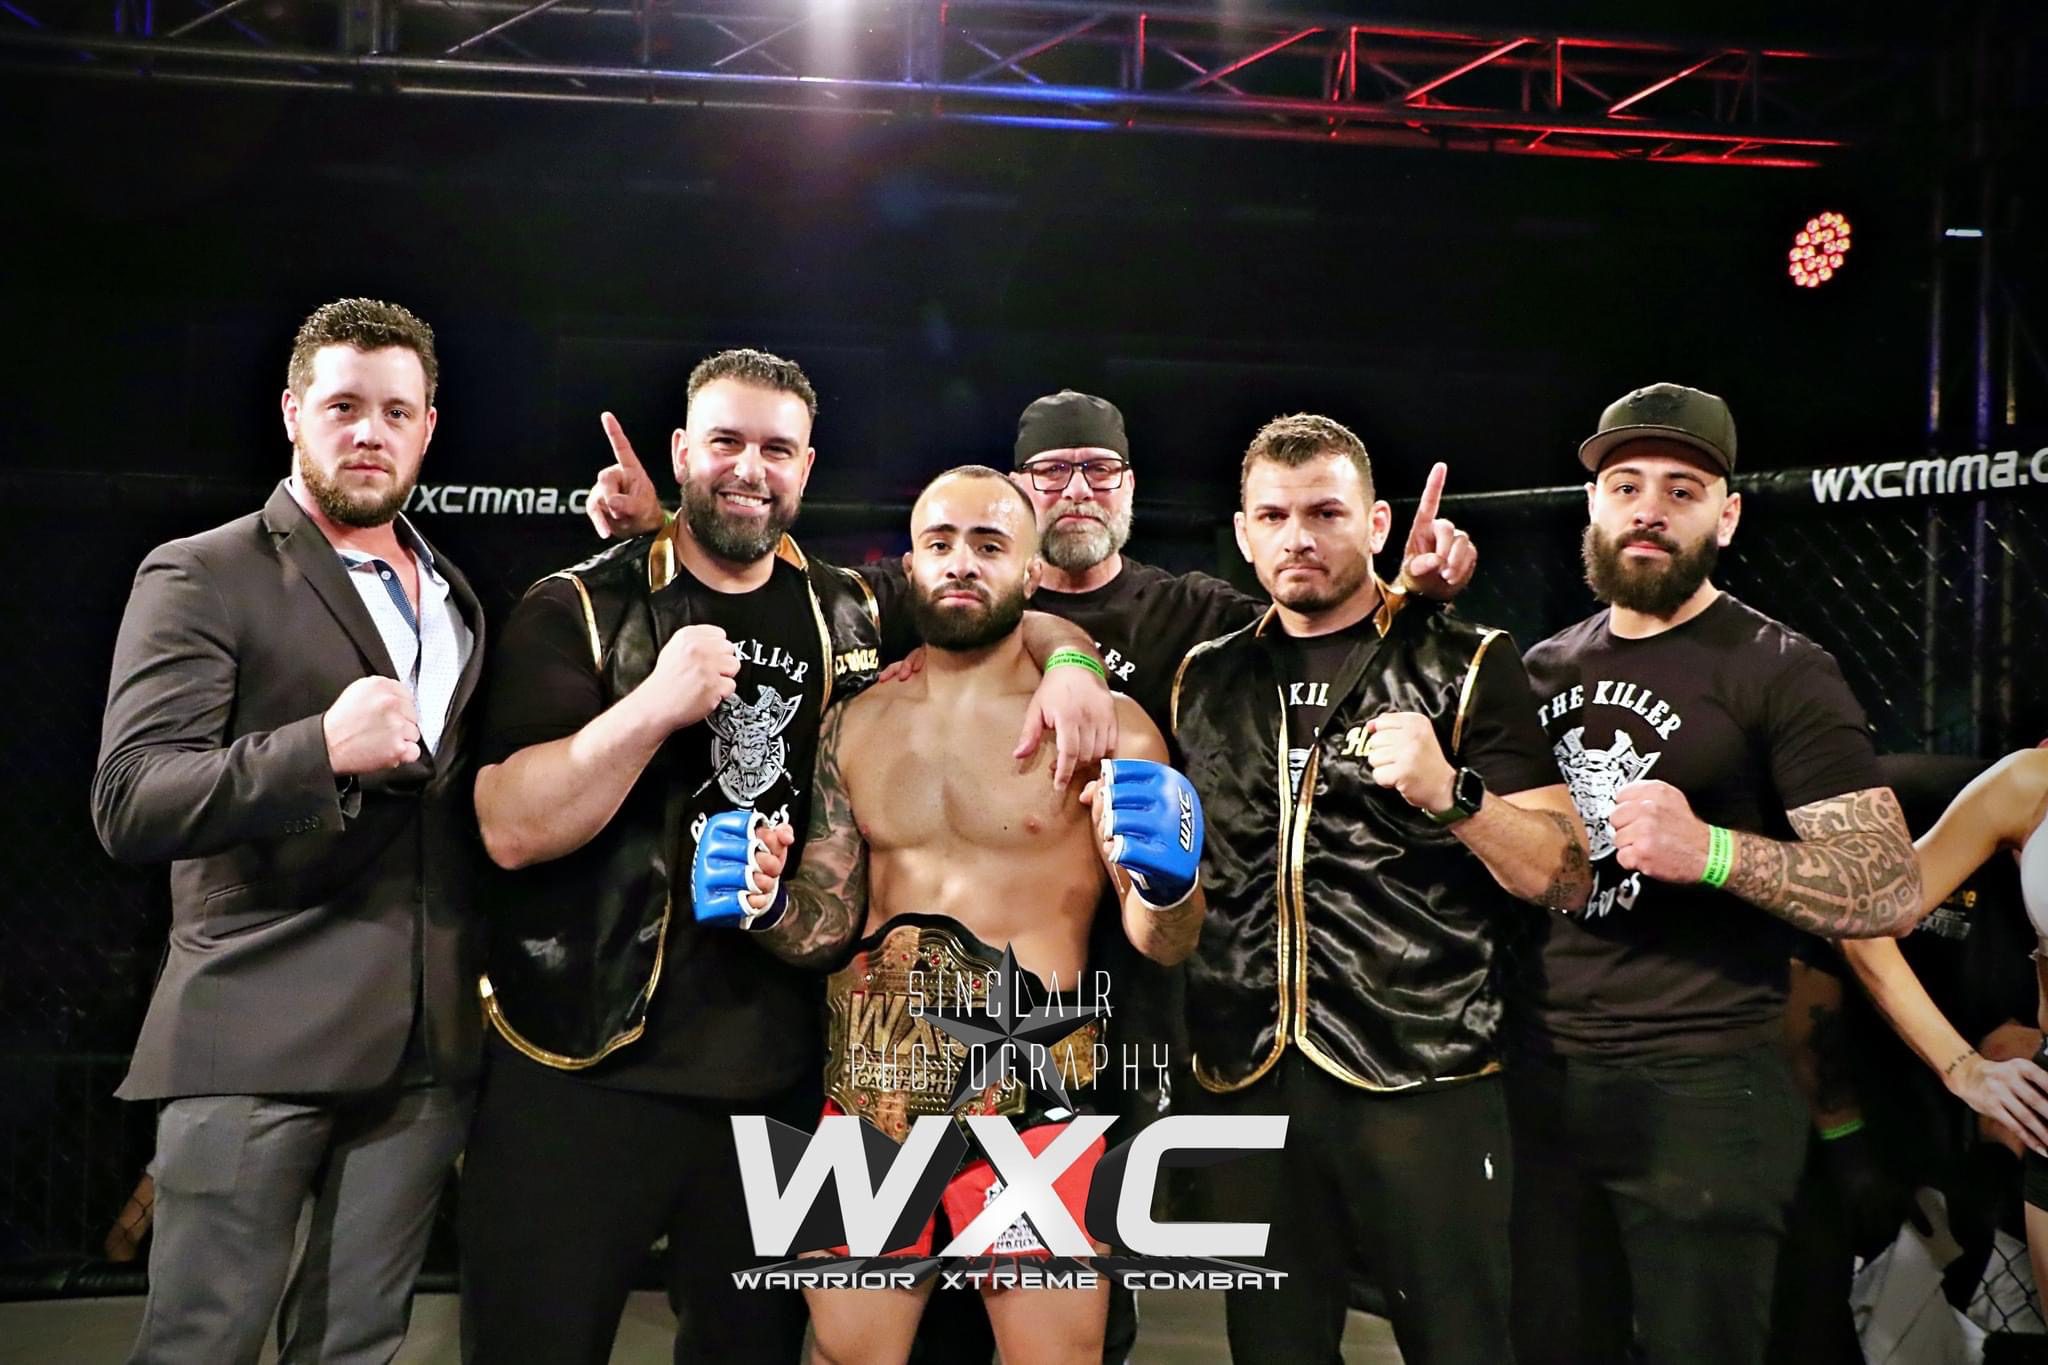 Abe Alsaghir celebrates a successful MMA fight, surrounded by Detroit Jiu-Jitsu coaches (left to right) Shea Butler (wrestling), Anthony Fawaz (DJJ co-owner), Tony Callino (boxing), Ali "The Butcher" Hamka (kickboxing). Also pictured is Abe's brother Fouzi (far right). Photo courtesy: Abe Alsaghir/Sinclair Photography